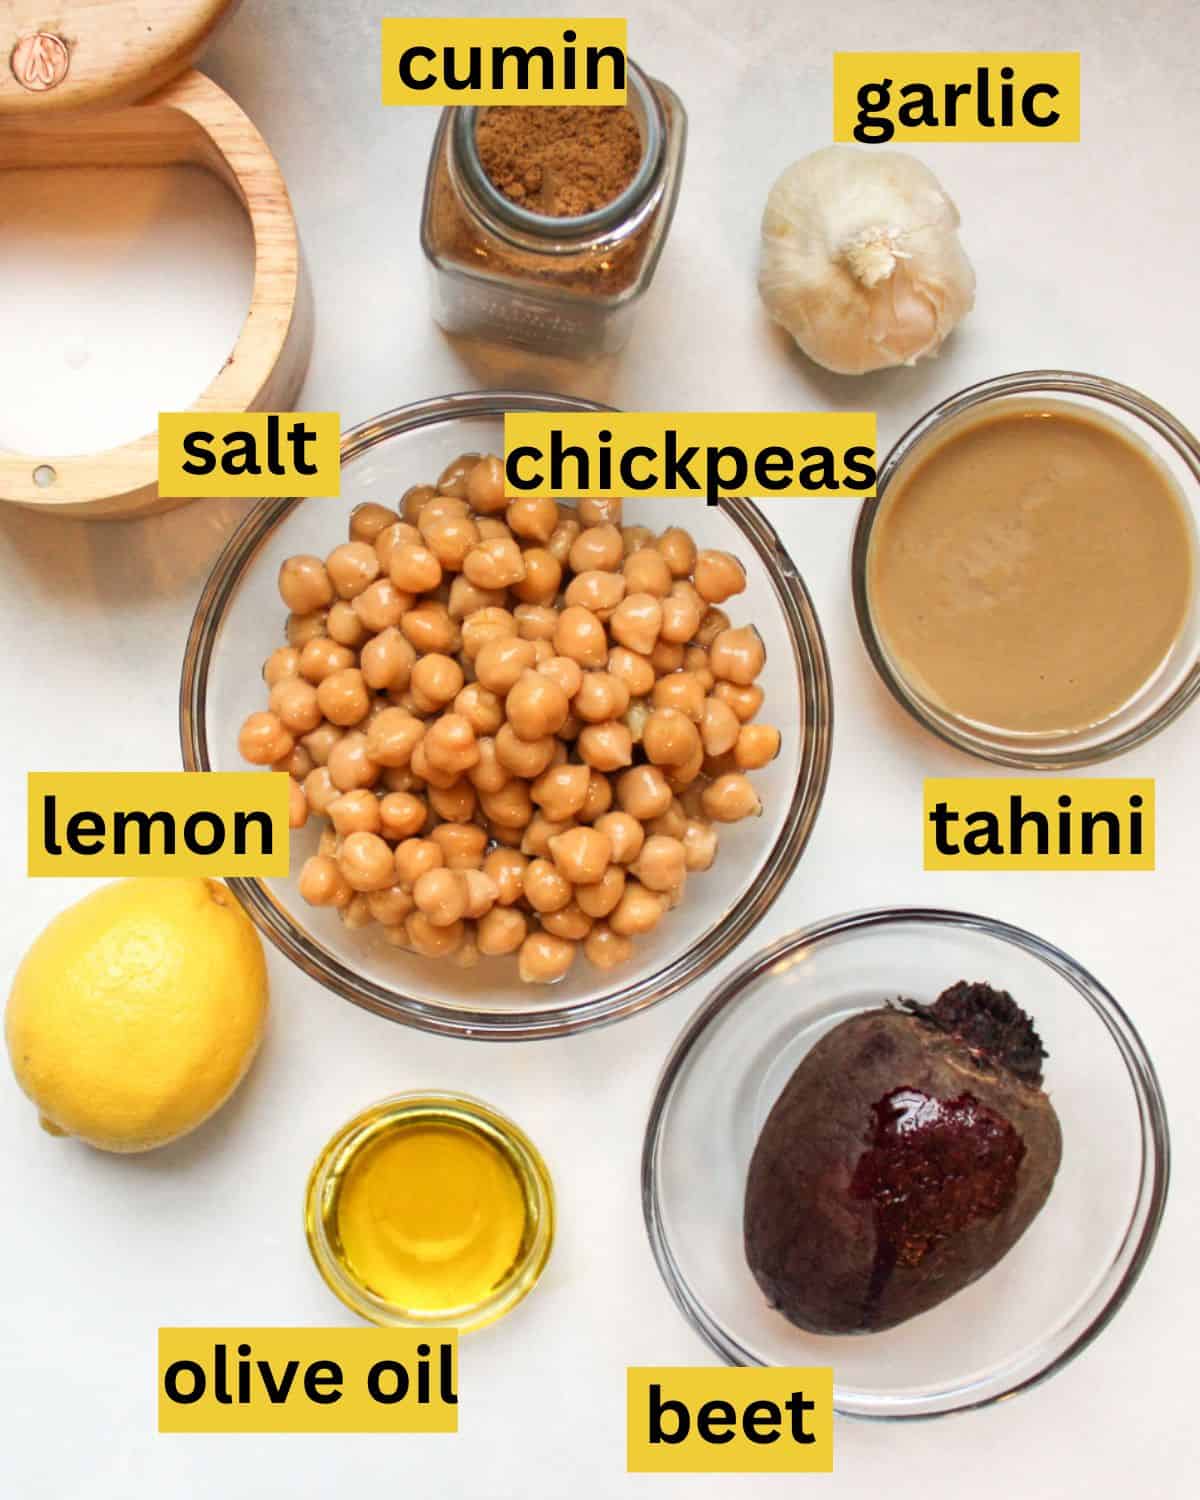 All the recipe ingredients neatly arranged on a white background, each labeled salt, lemon, cumin. chickpeas, olive oil, garlic, tahini, beet.